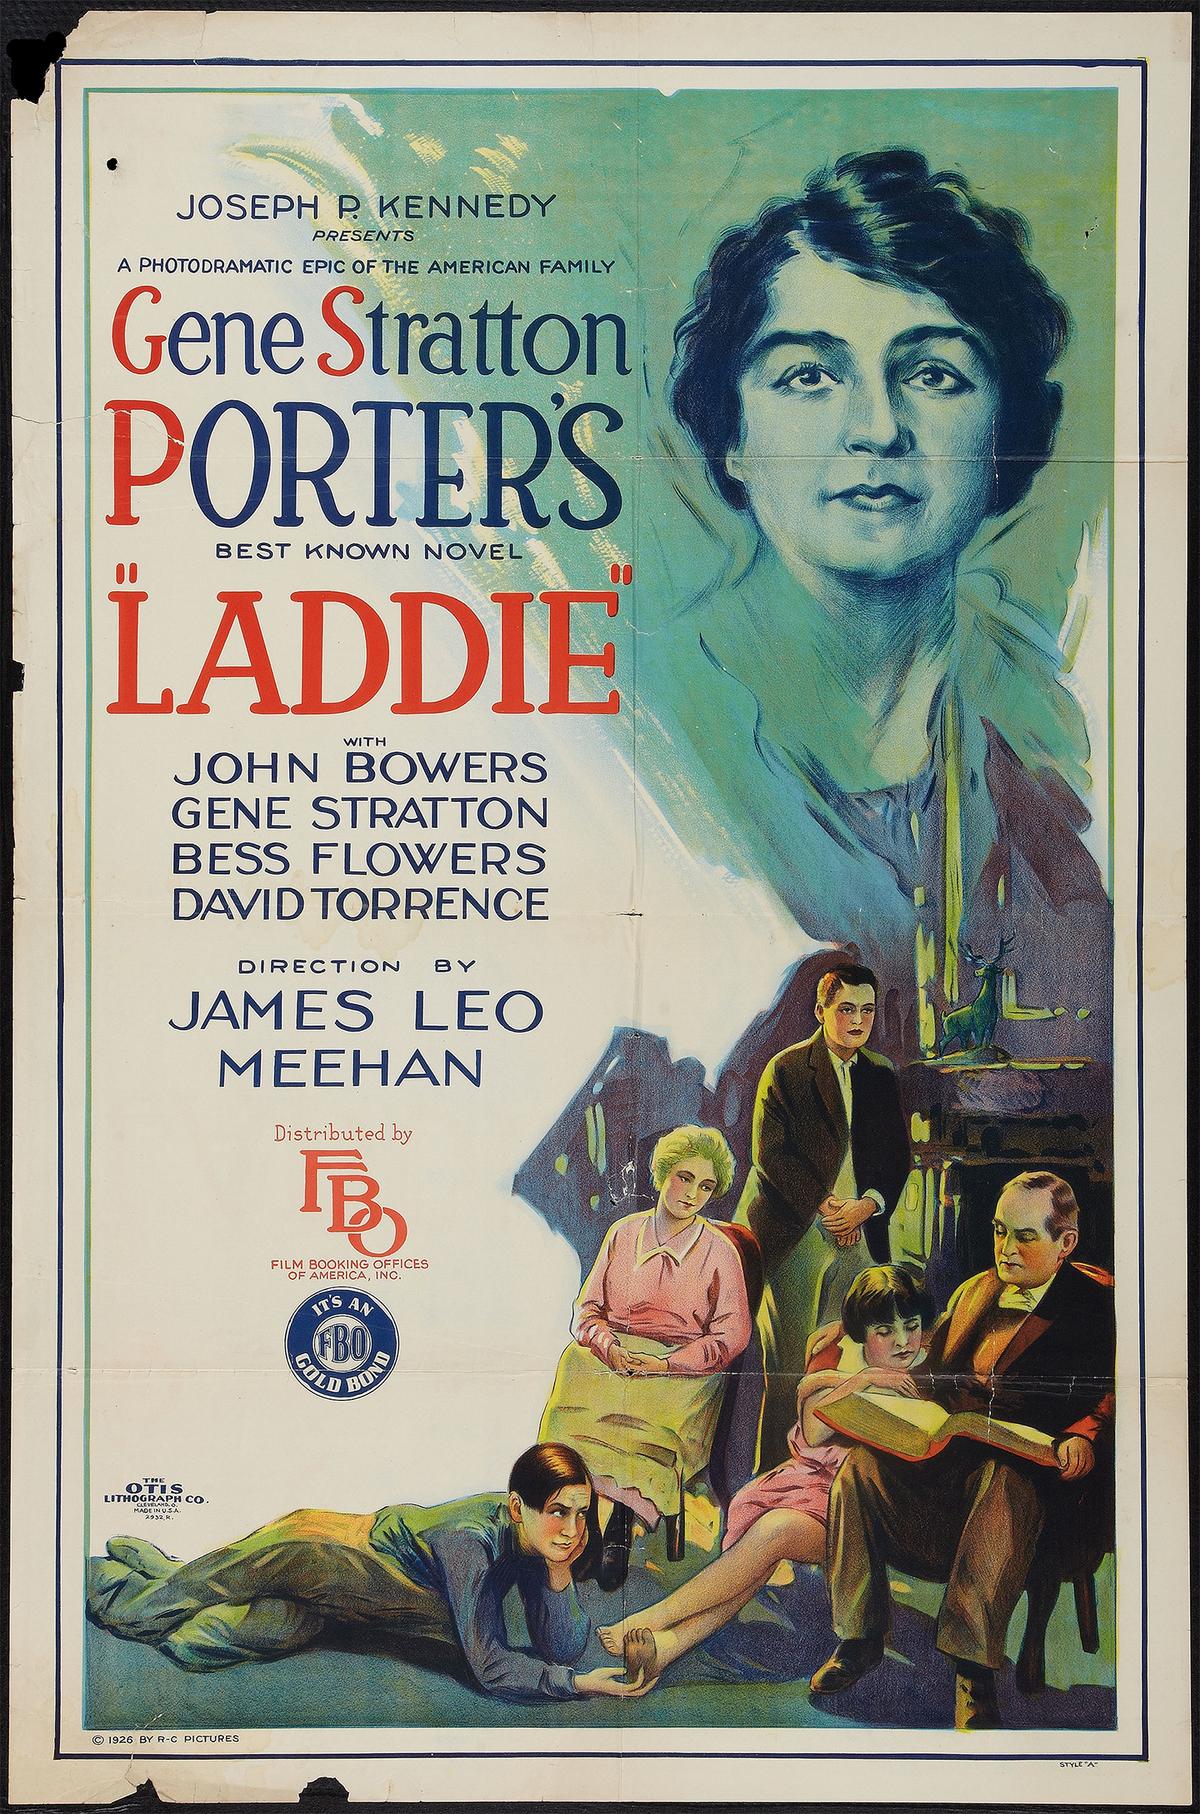 Movie poster for the 1926 film "Laddie," based off the book written by Gene Stratton-Porter. Film Booking Offices of America. (Public Domain)